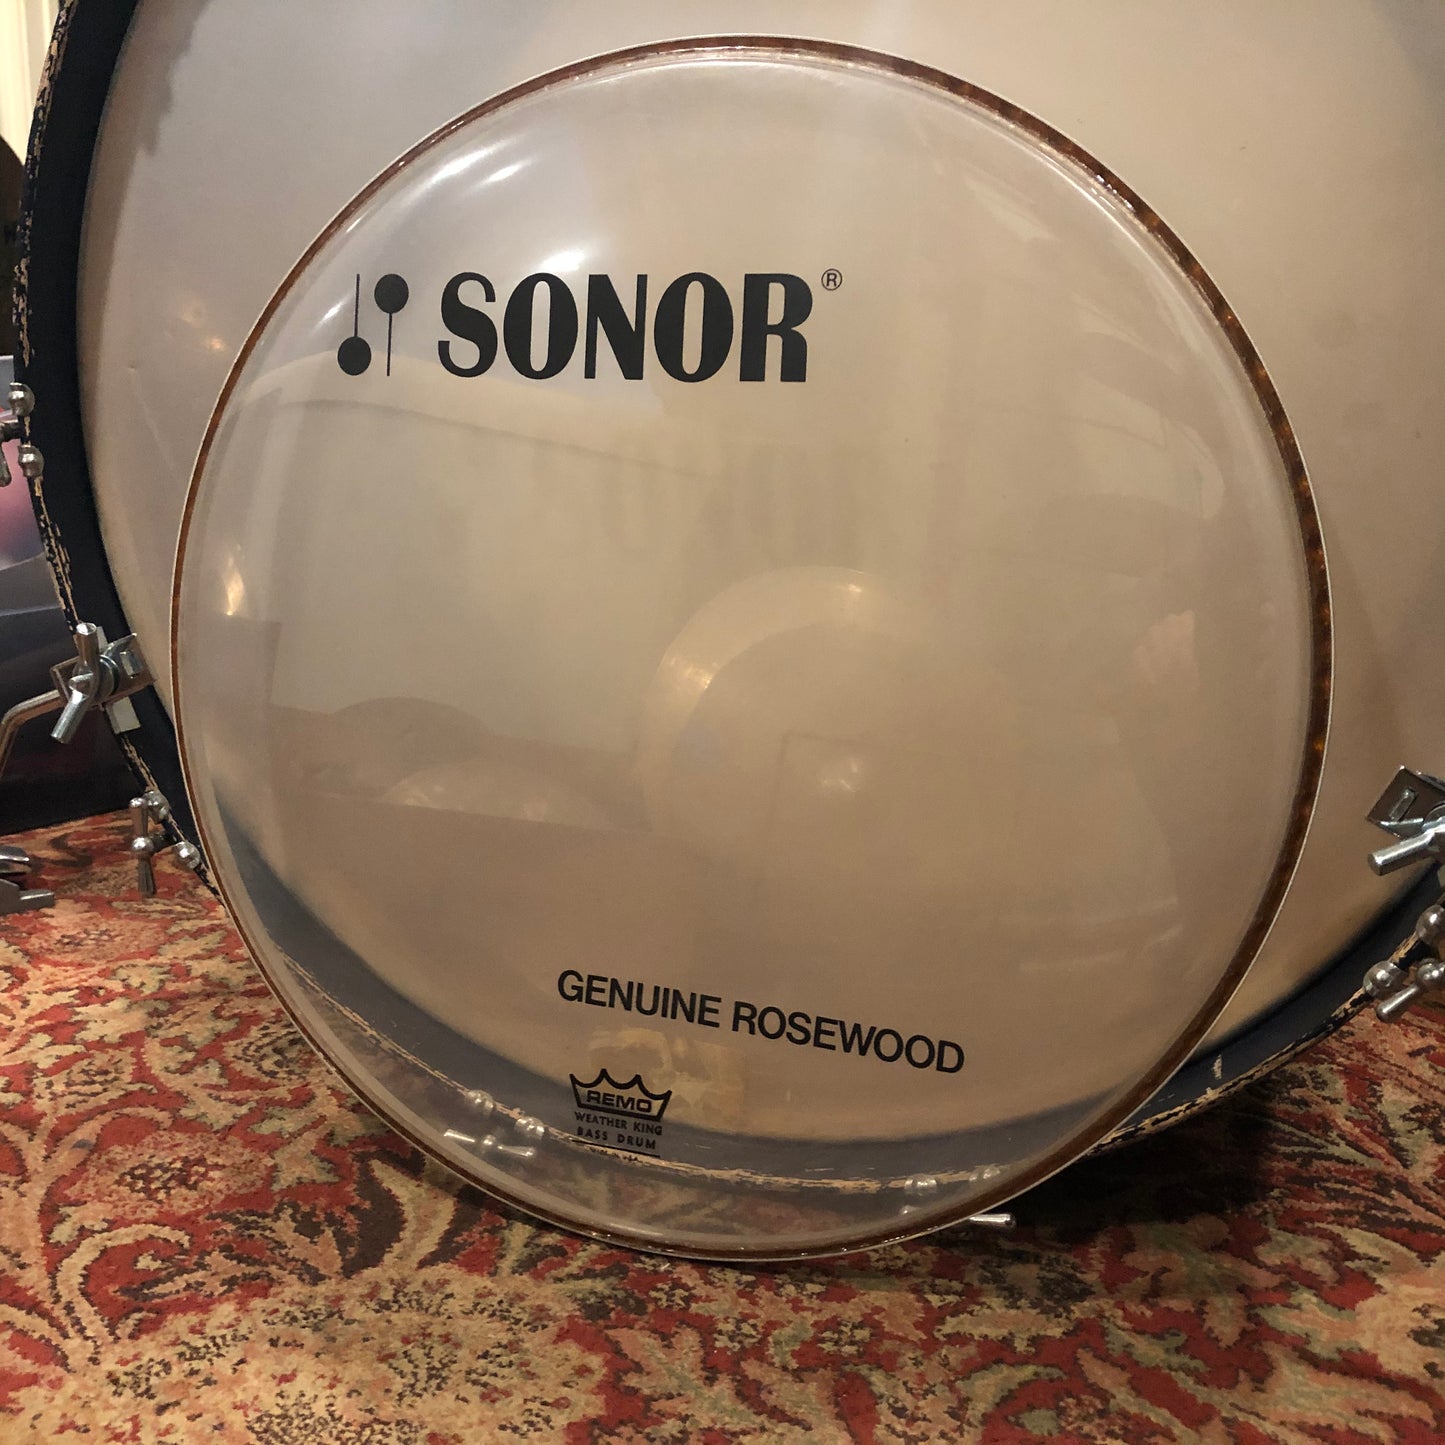 Vintage N.O.S. 1960s Sonor Teardrop / Phonic Genuine Rosewood Remo Bass Drum Clear Head